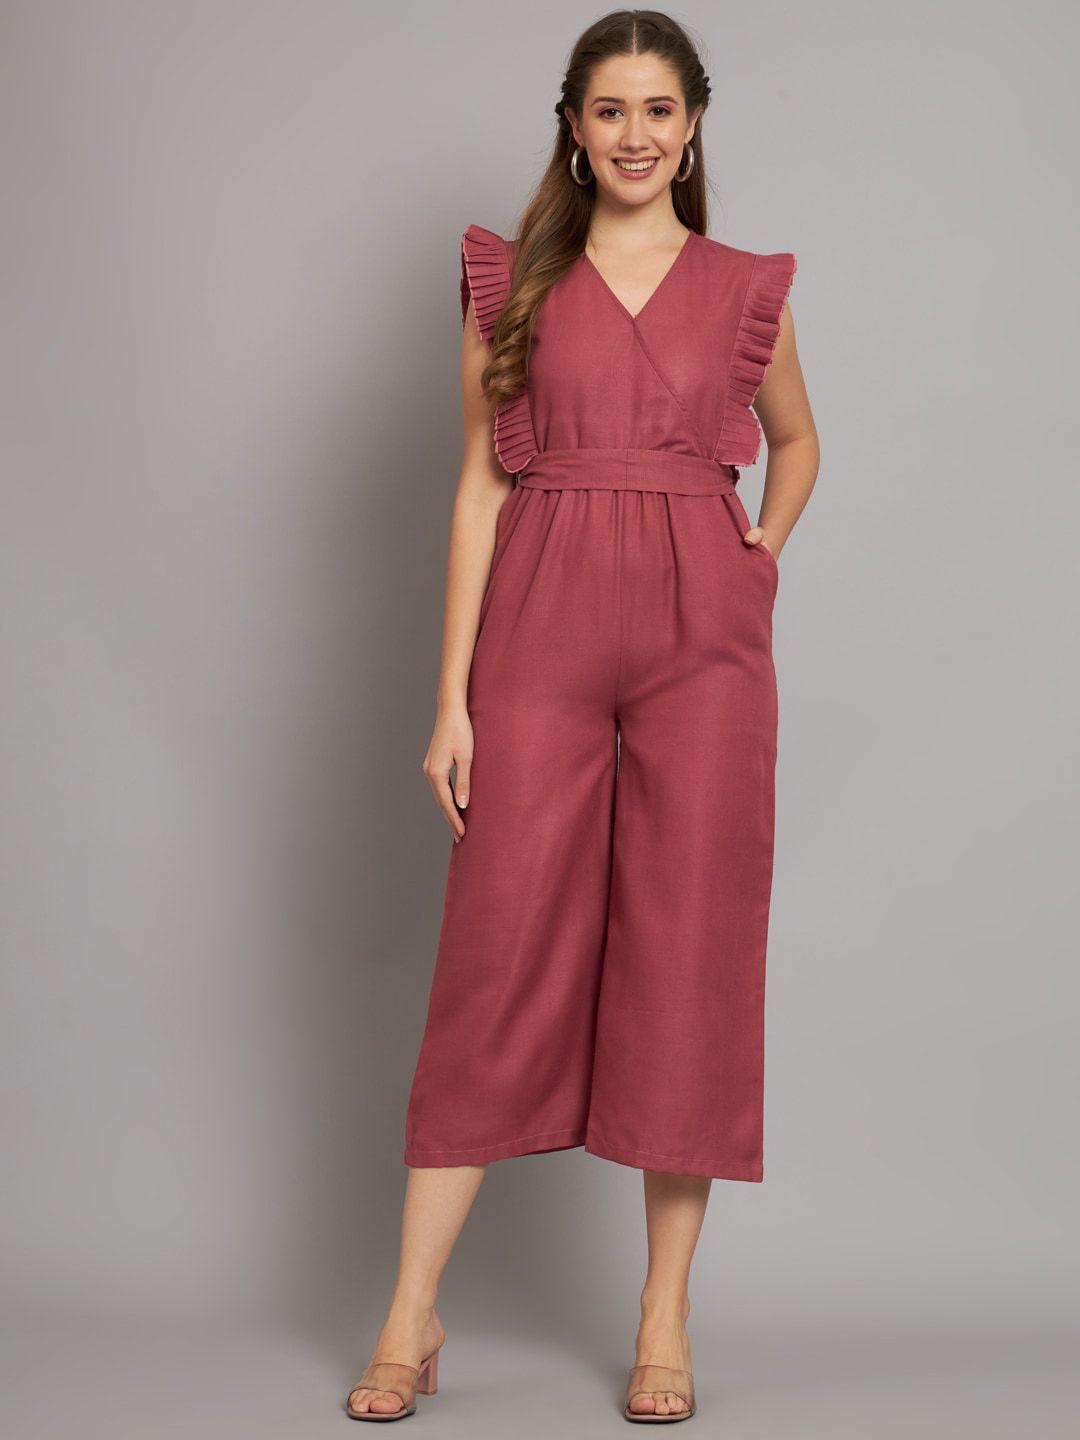 the dry state maroon v-neck waist tie-ups cotton basic jumpsuit